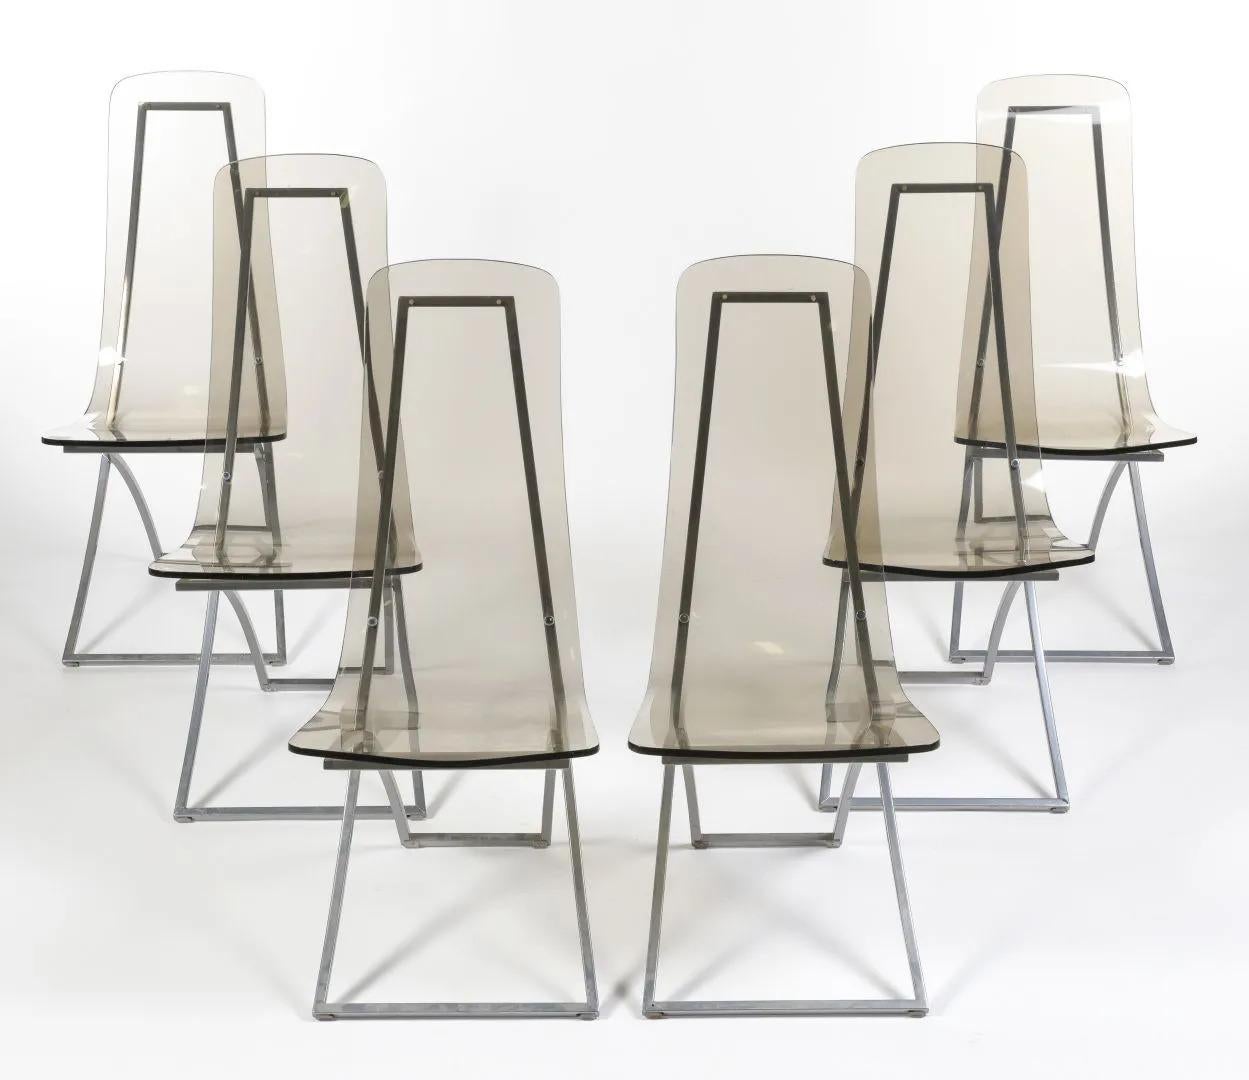 French 6 CH4 Chairs by Edmond Vernassa, Chromed Steel and Plexiglas, circa 1973 For Sale